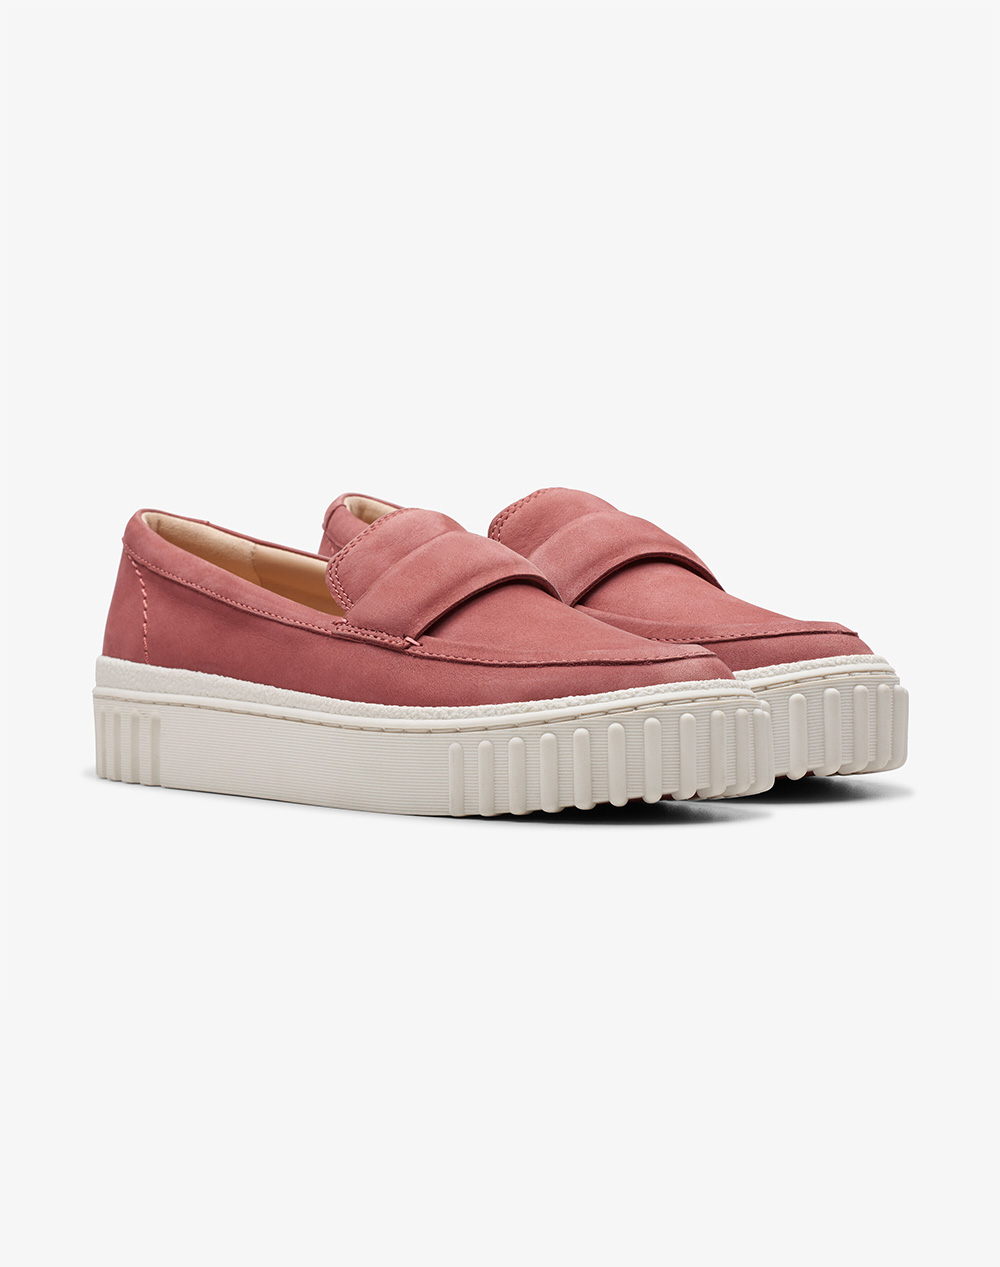 CLARKS Mayhill Cove Dusty Rose Nbk